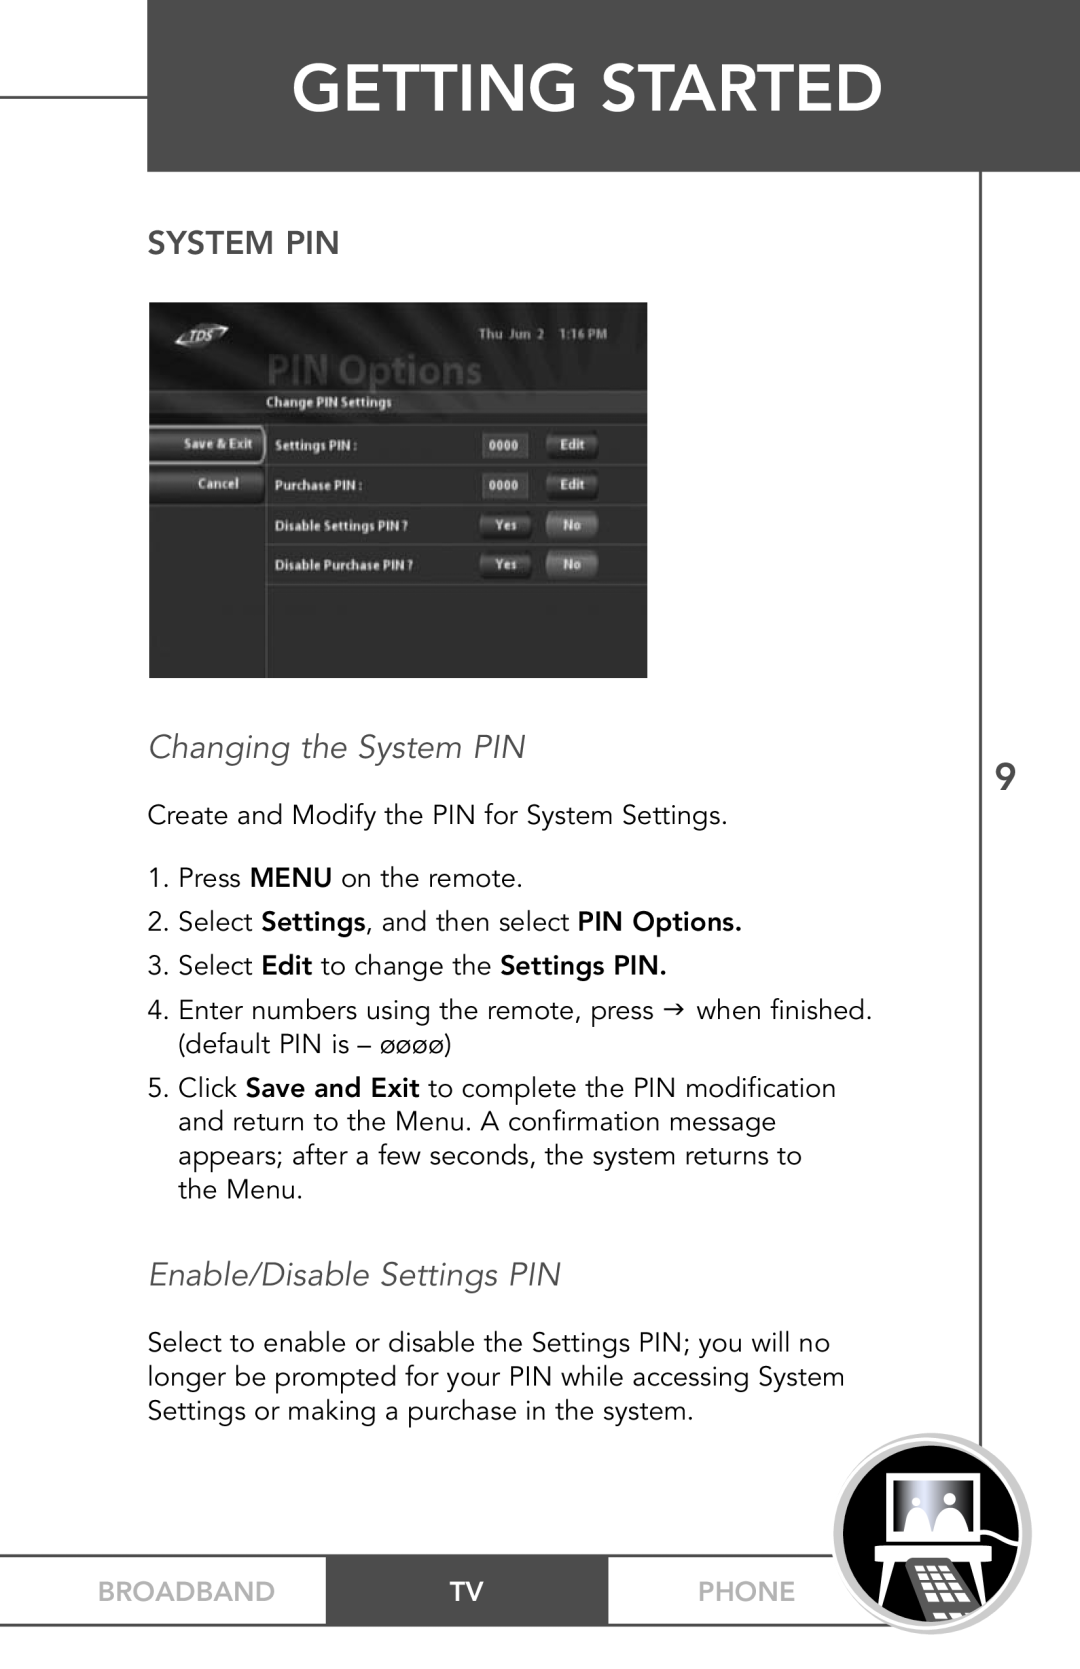 TV Guide On Screen PHONEBROADBAND TV System Pin, Changing the System PIN, Enable/Disable Settings PIN, Getting Started 